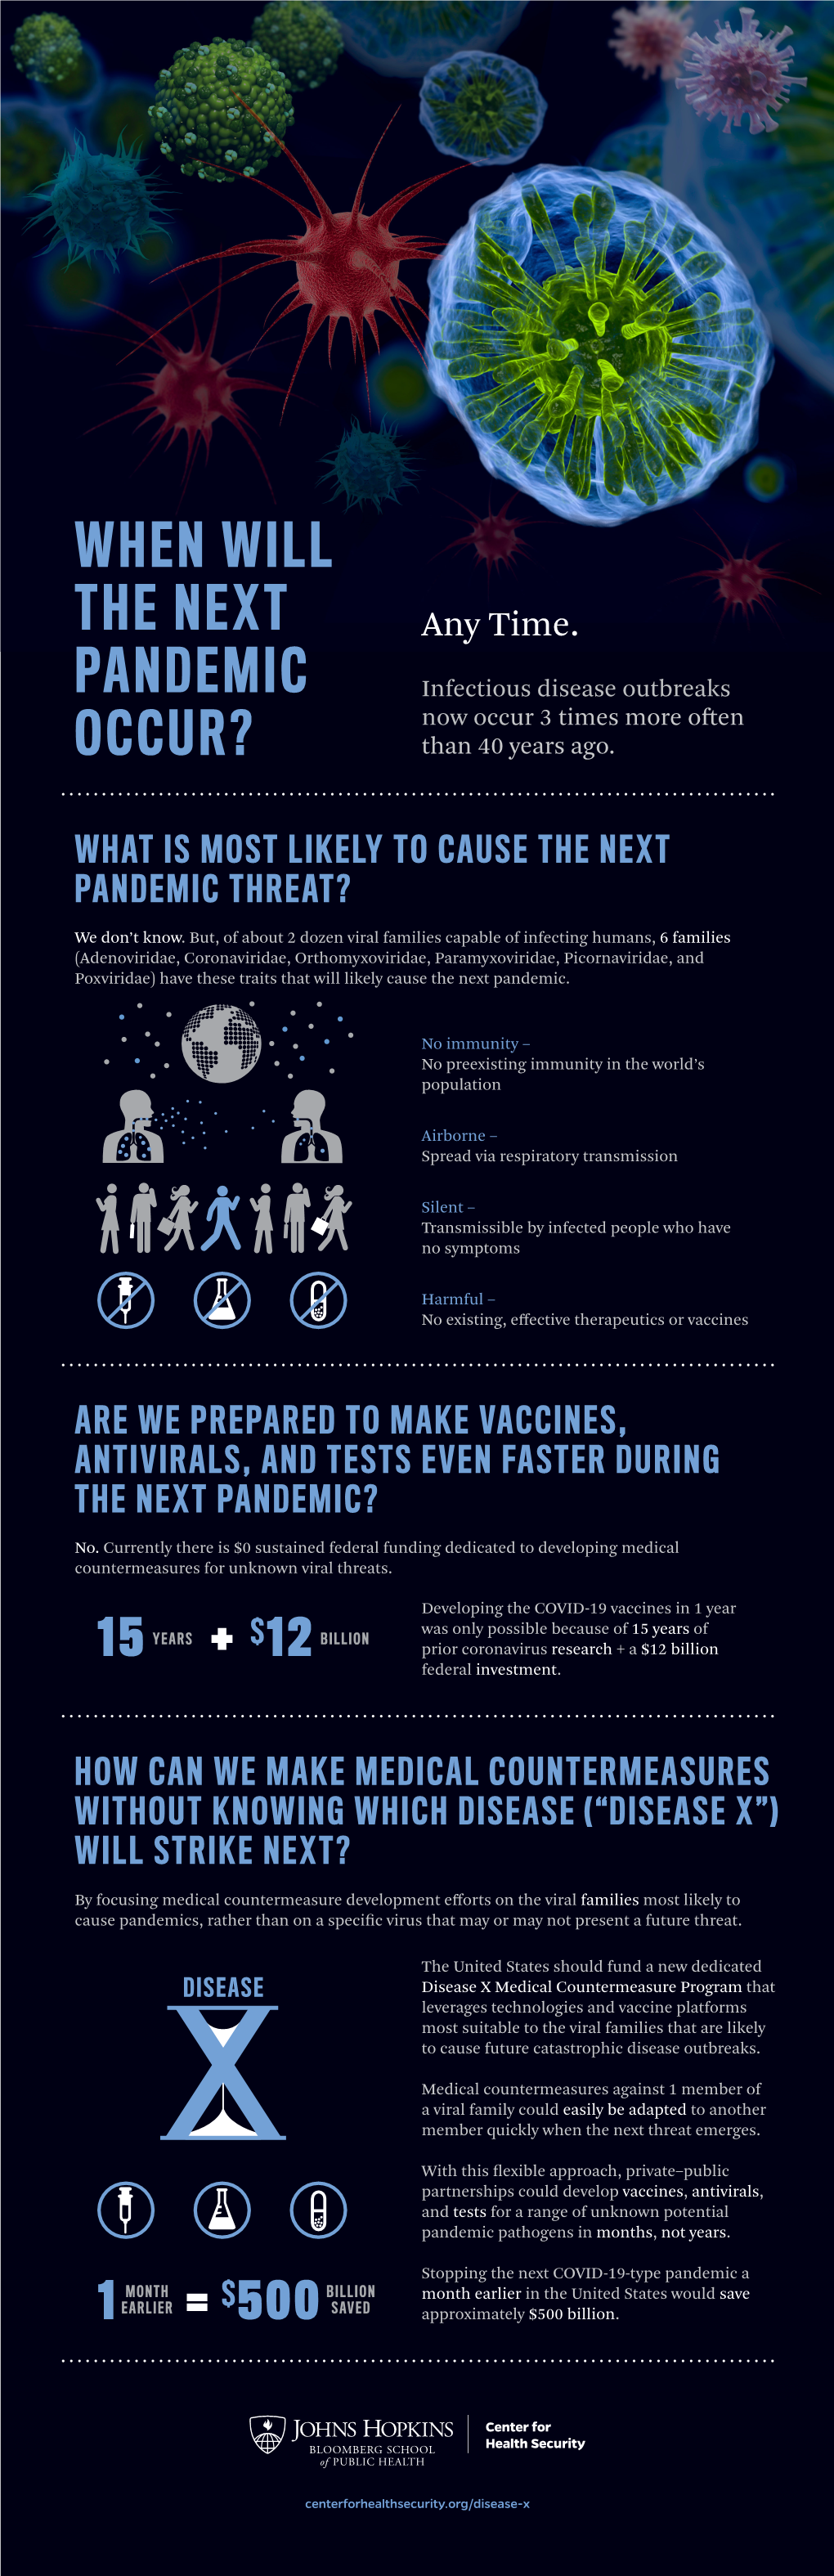 When Will the Next Pandemic Occur?